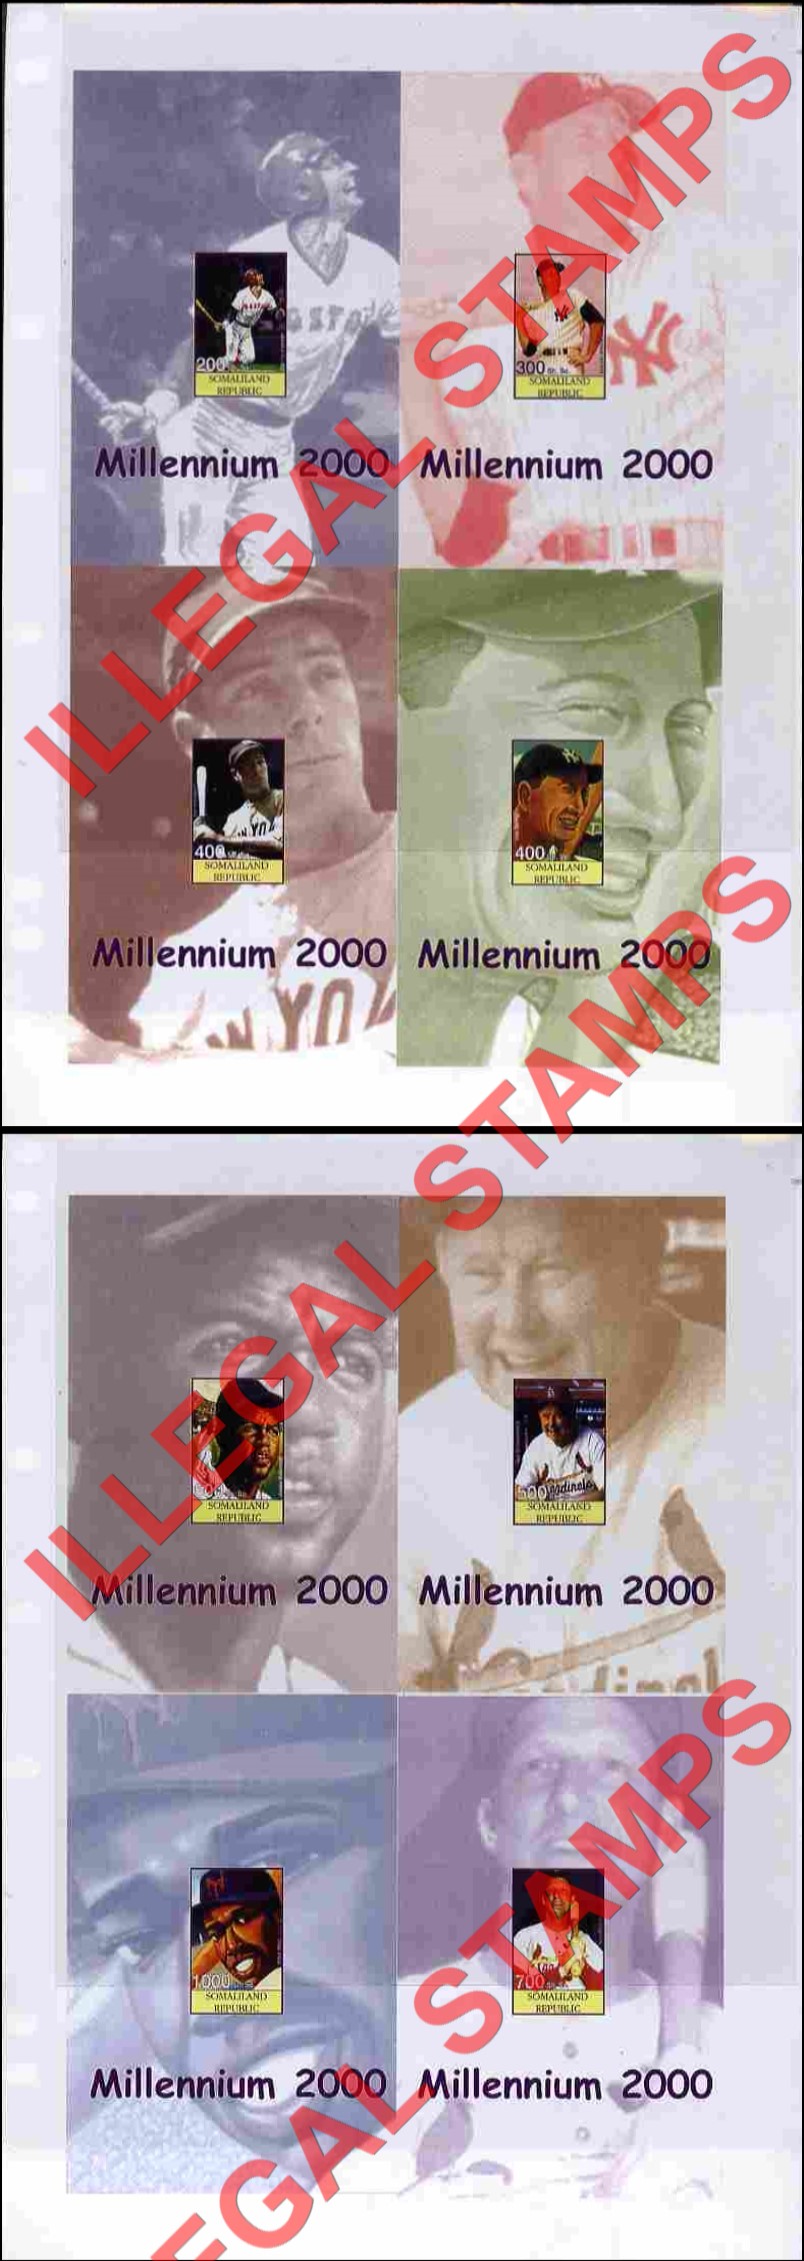 Somaliland 2000 Millenium Baseball Players Illegal Stamp Souvenir Sheets of 1